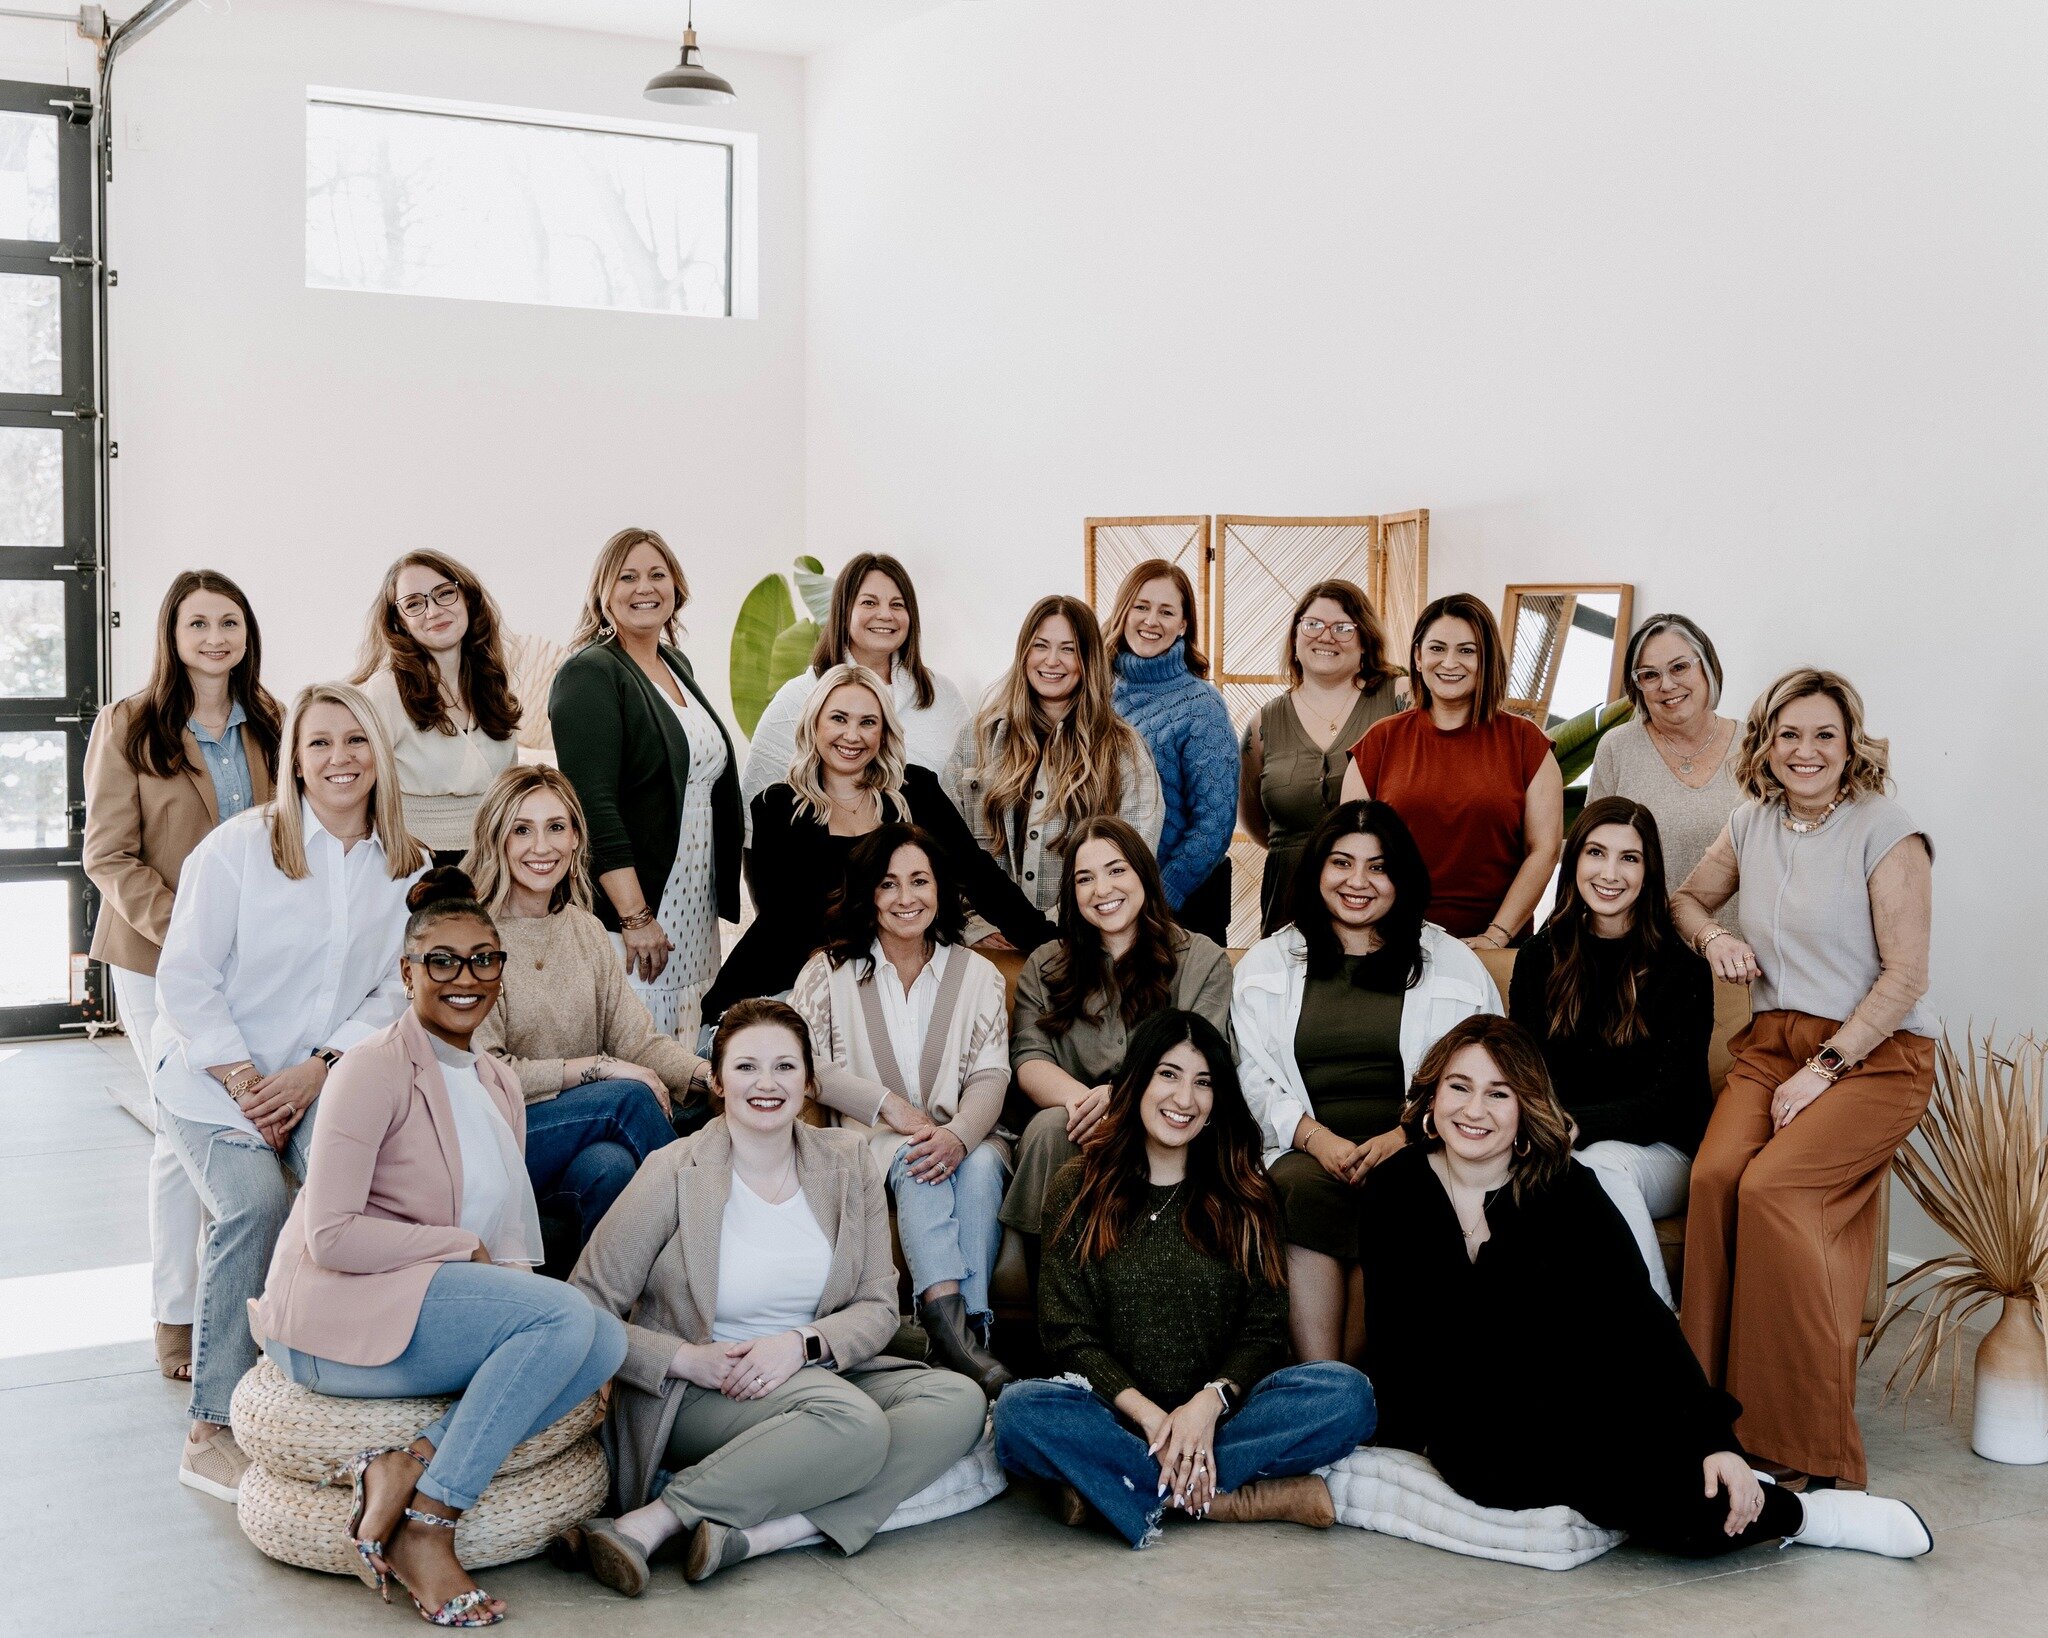 Happy International Women's Day!!

We are constantly amazed by the hardworking, driven, and inspiring women that are part of our community. We are so lucky to be surrounded and supported by some of the most incredible individuals.

Tag someone who ha